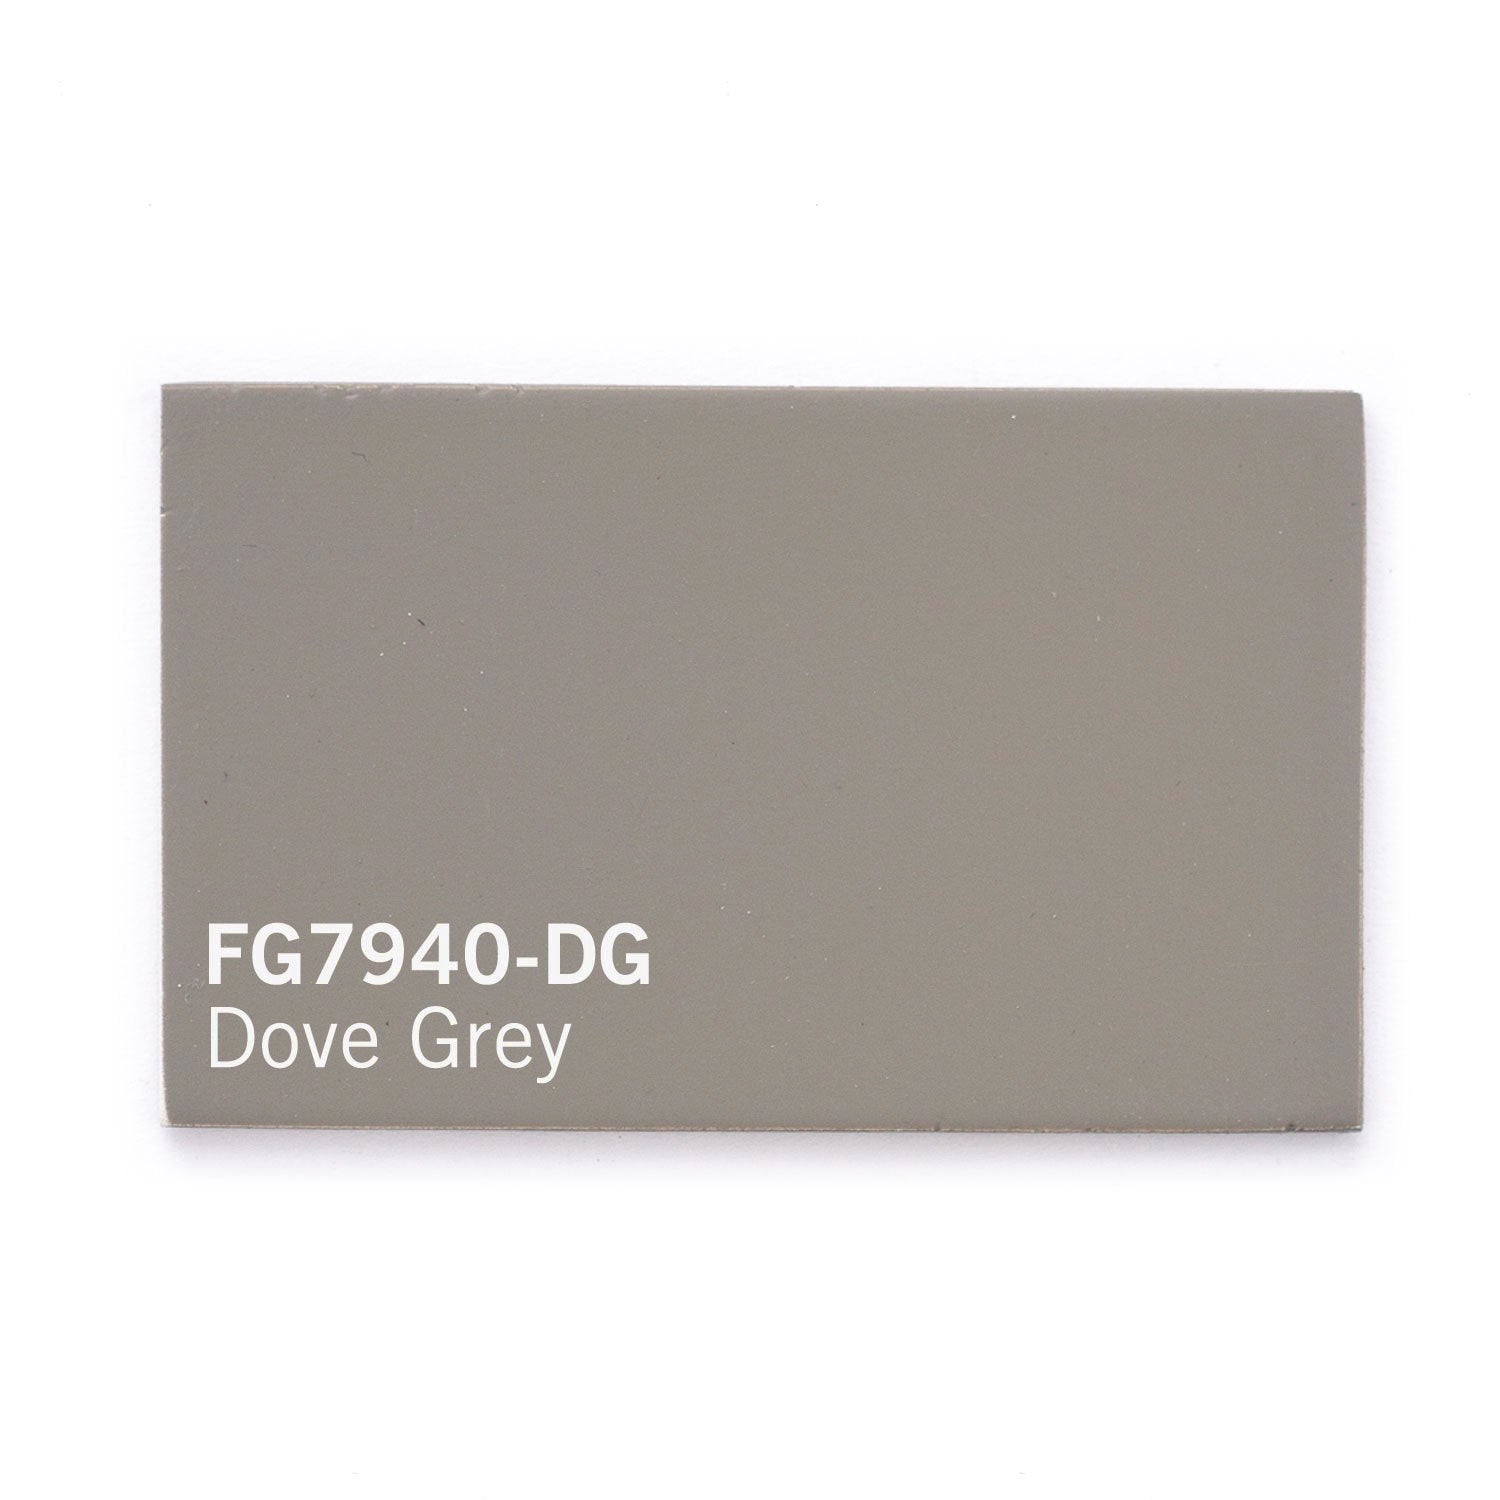 Sample Tile for Paint Color, Shadow Boxes & Planters, Dove Grey